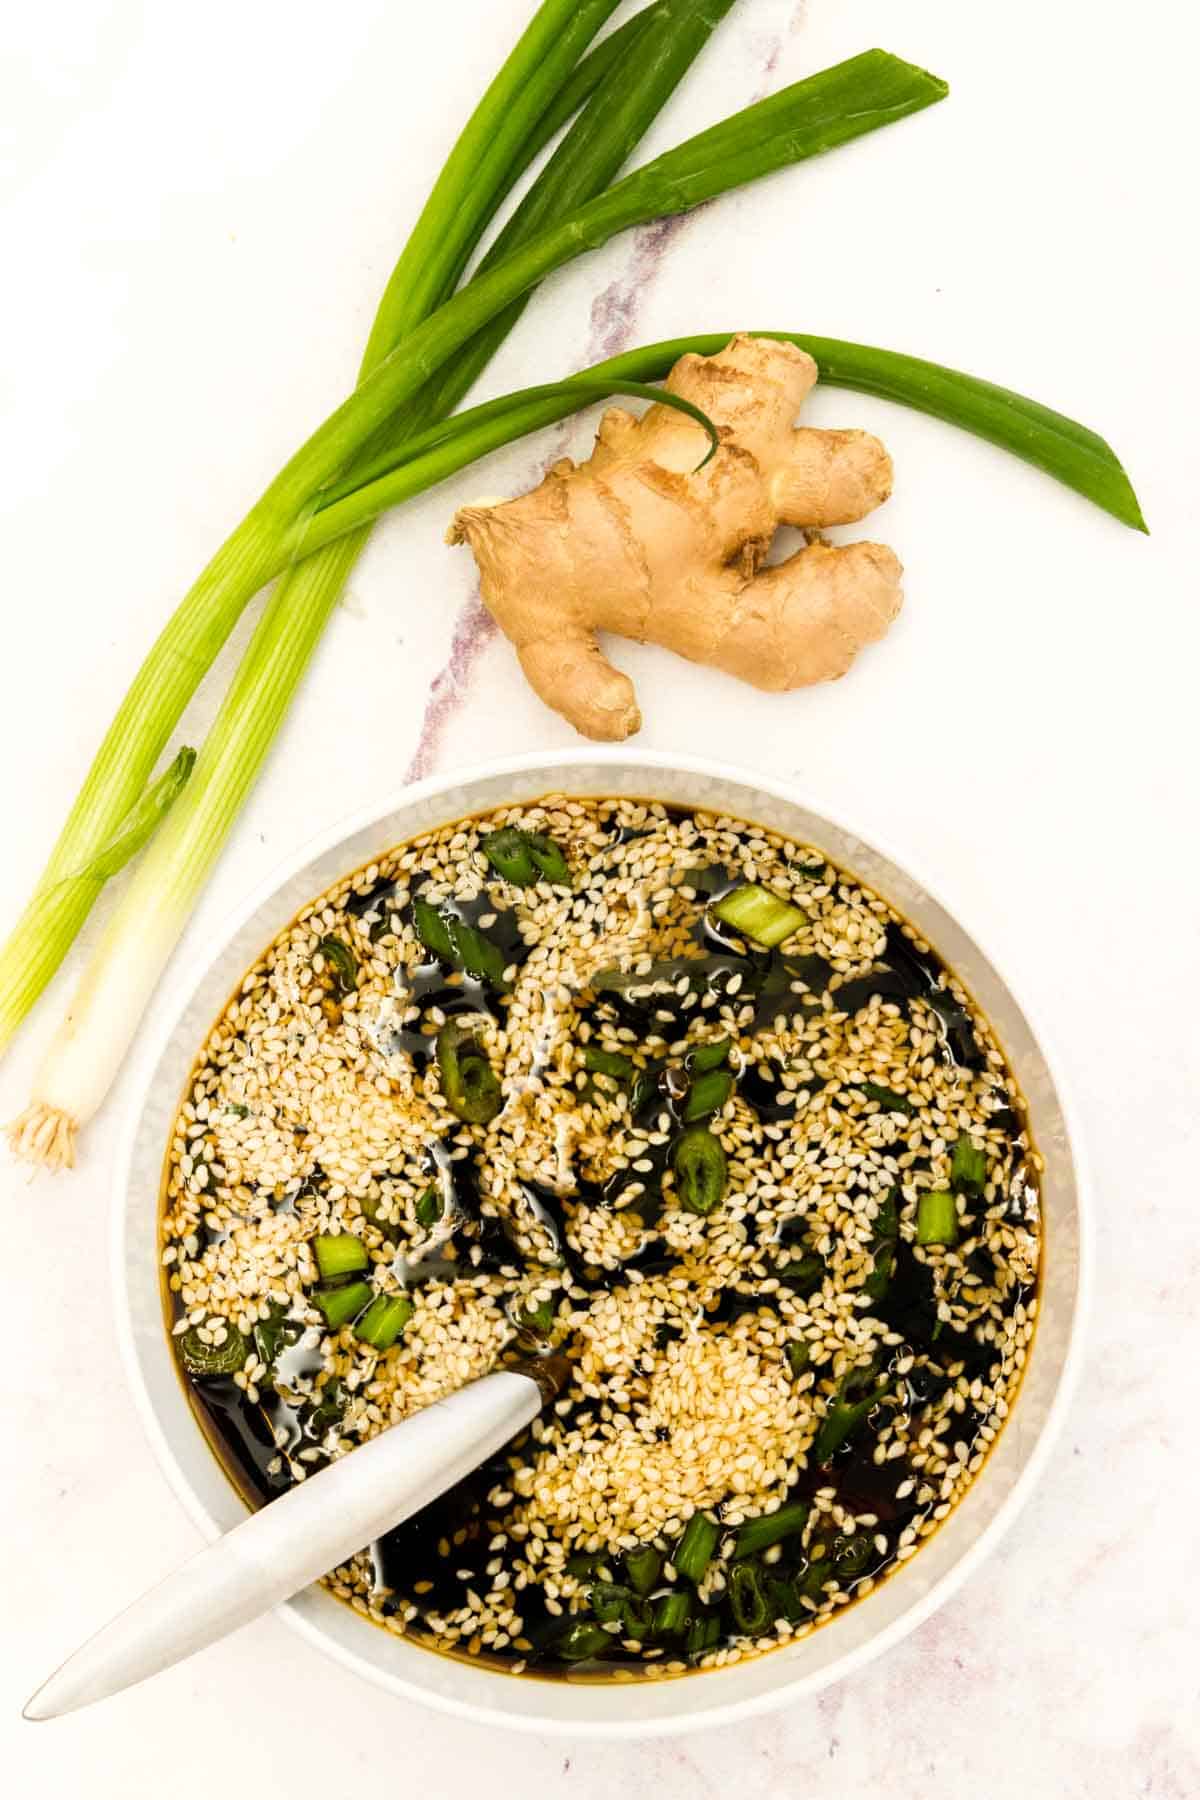 A bowl of the sesame glaze sauce on a tabletop next to a couple of whole scallions and a knob of fresh ginger.